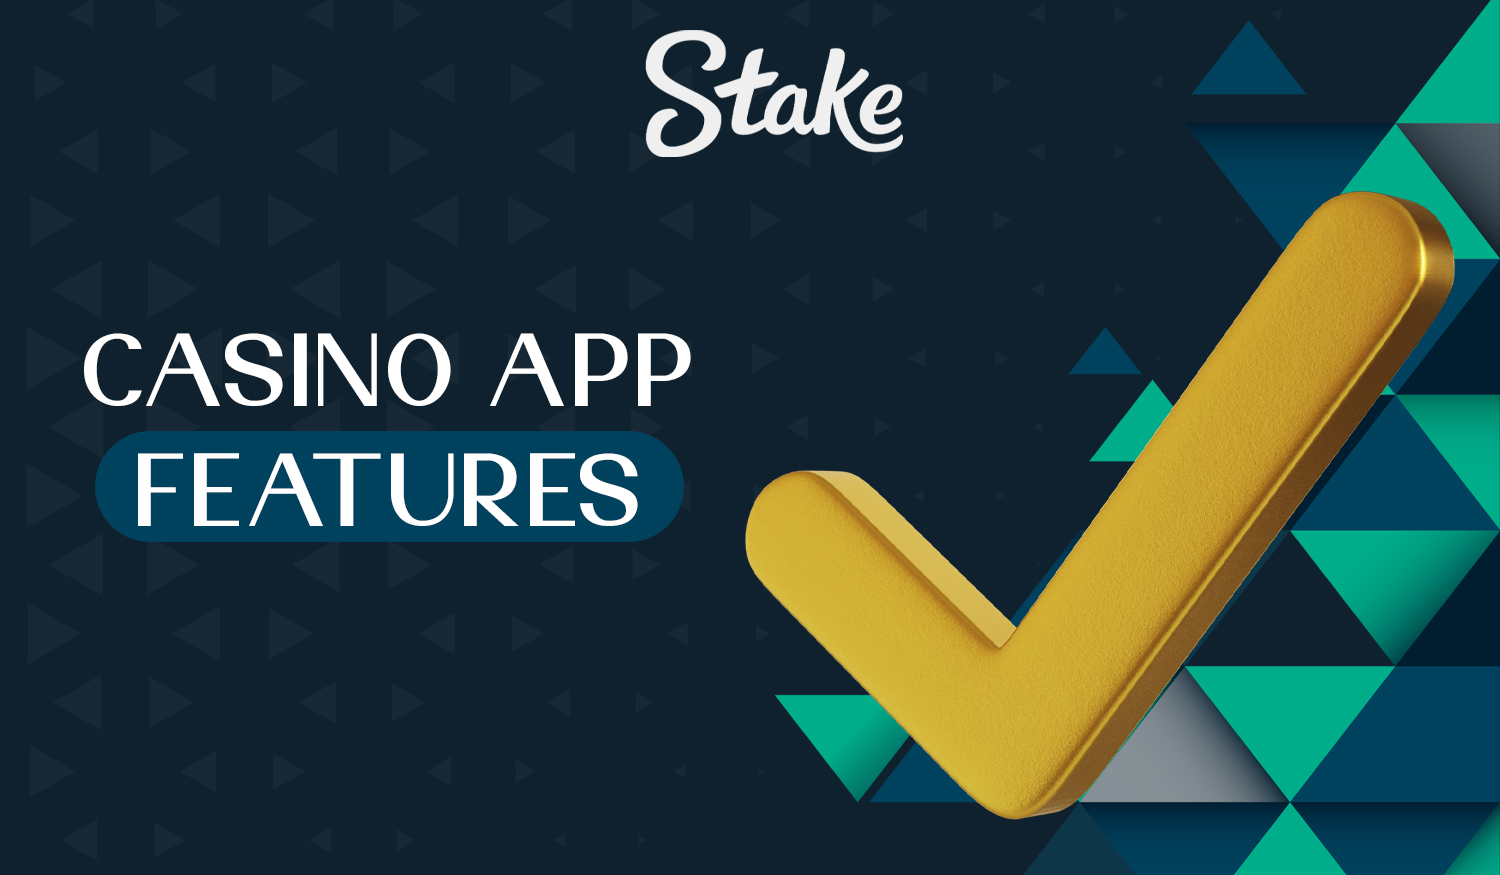 Top features of the Stake mobile app for Indian users